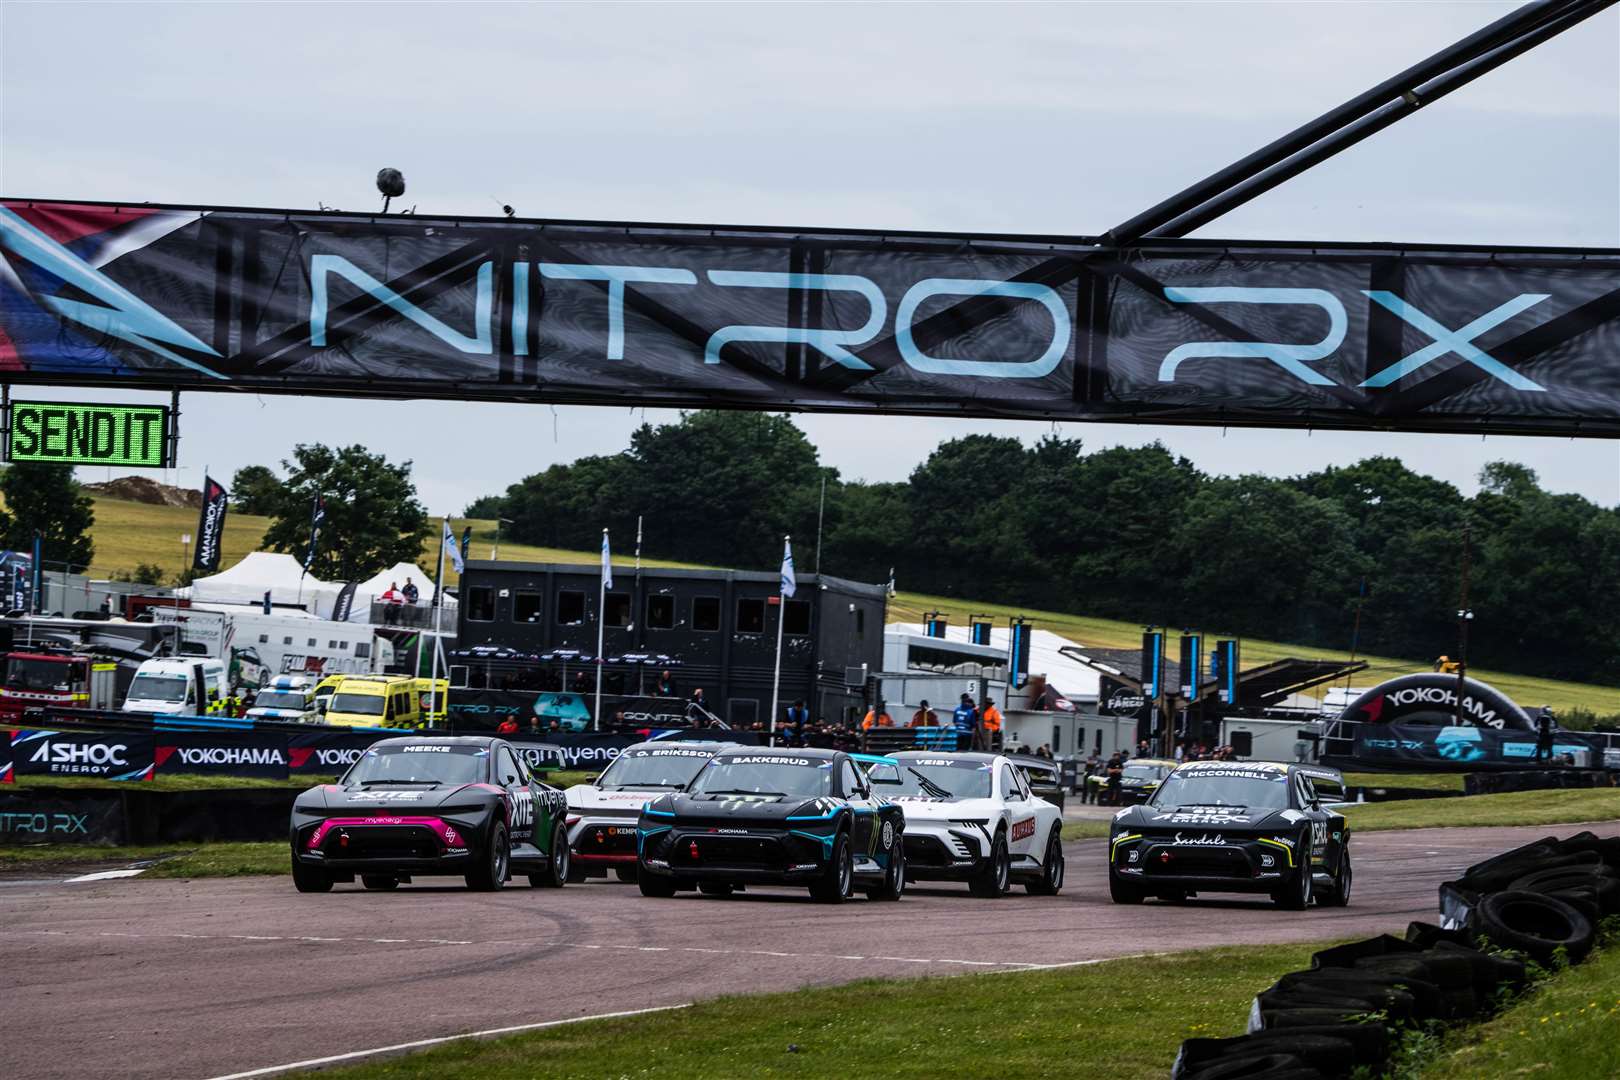 Lydden hosted the first Nitro Rallycross round outside America. Pictures: Nitro Rallycross